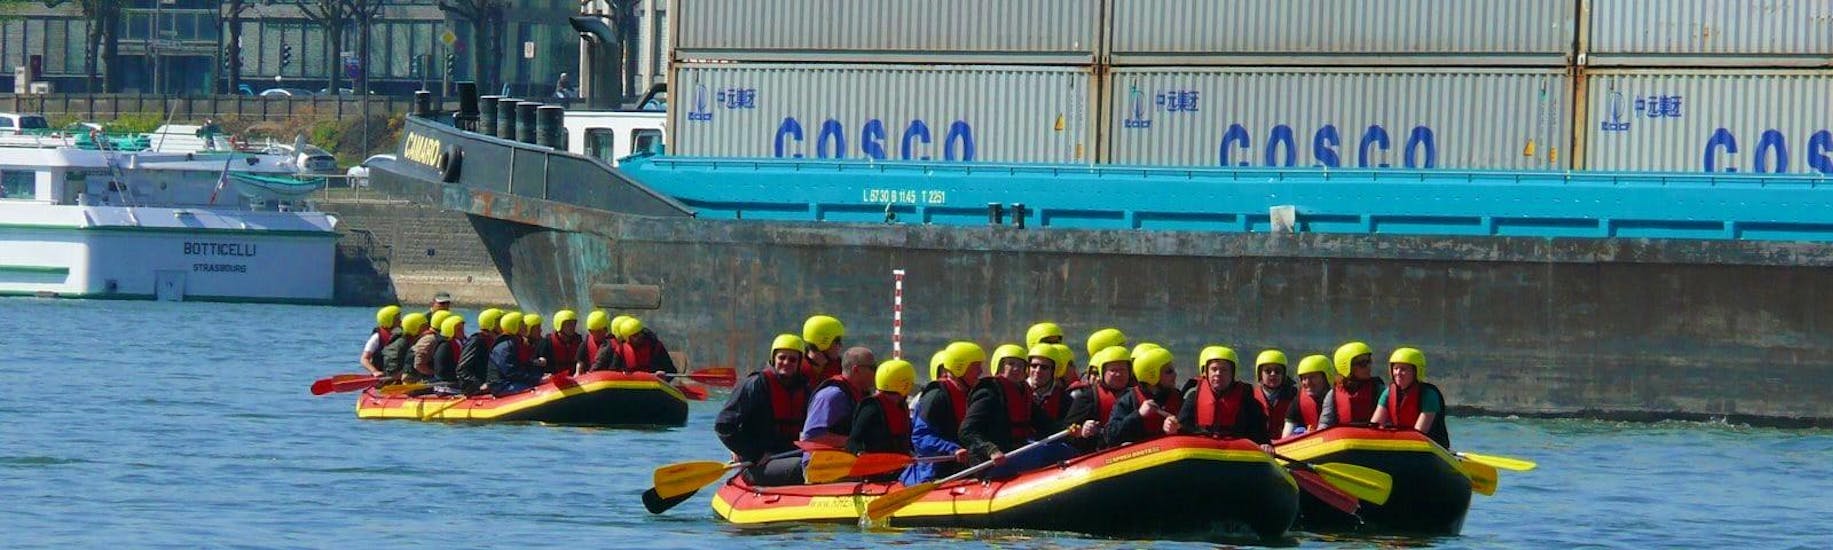 Rafting facile a Cologne.